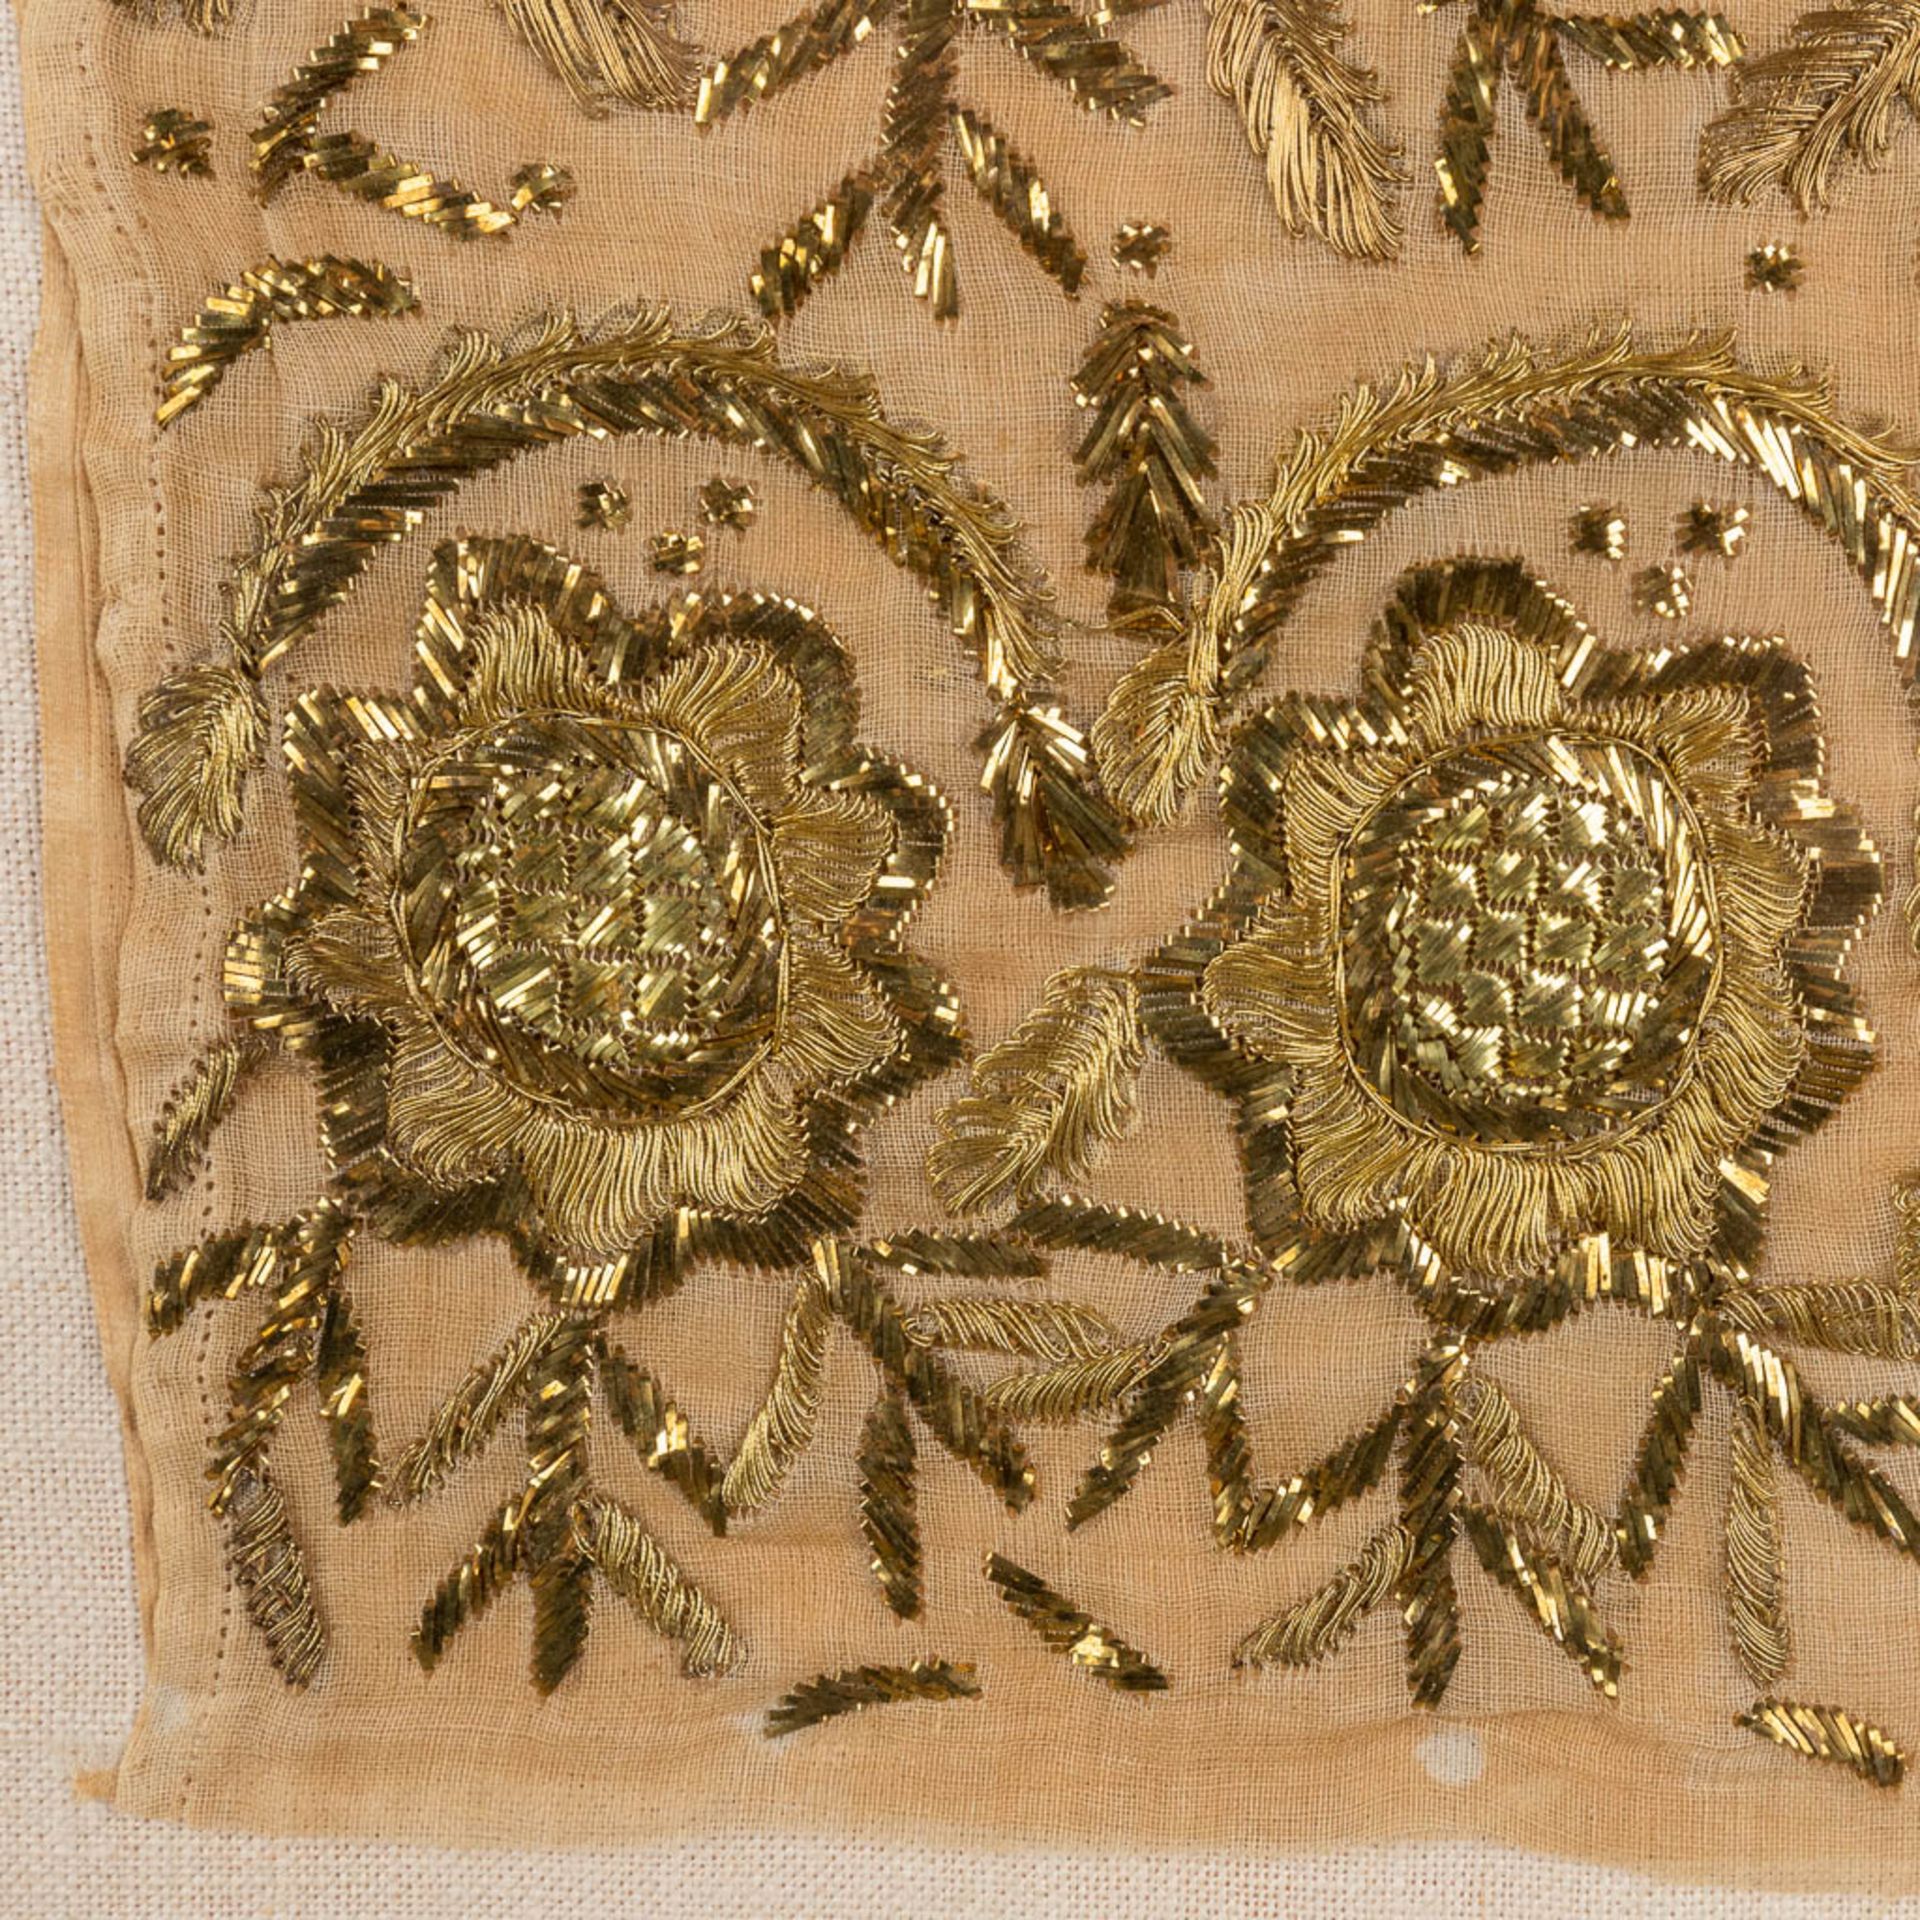 A small frame with gold-thread embroideries. (W:23 x H:37 cm) - Image 5 of 6